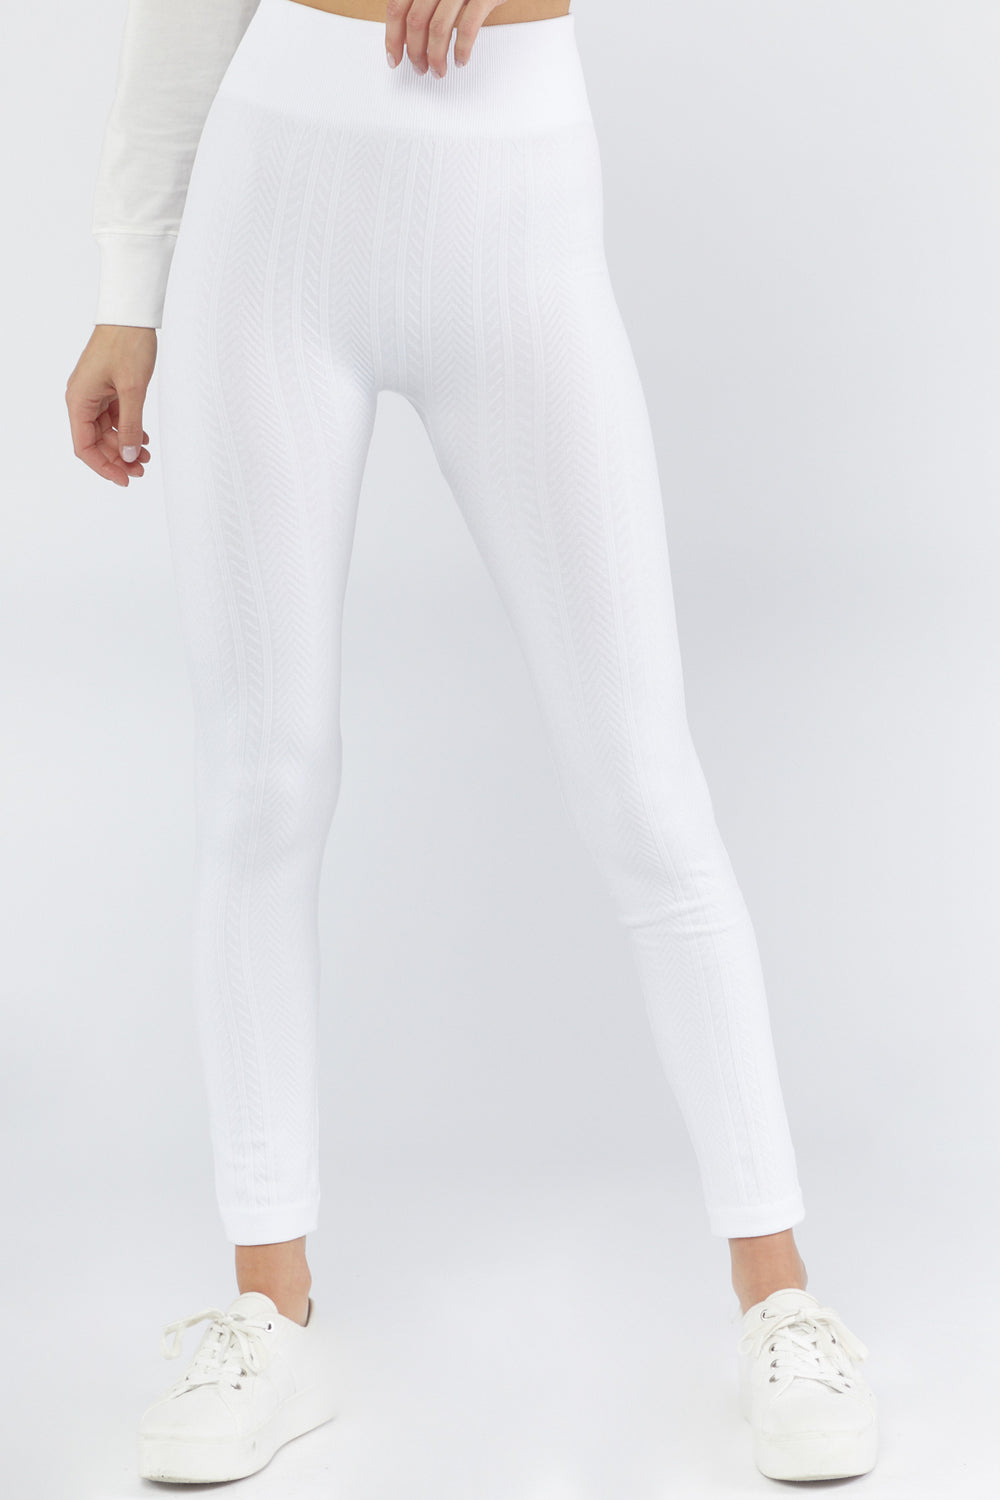 Seamless Cable Knit Legging White